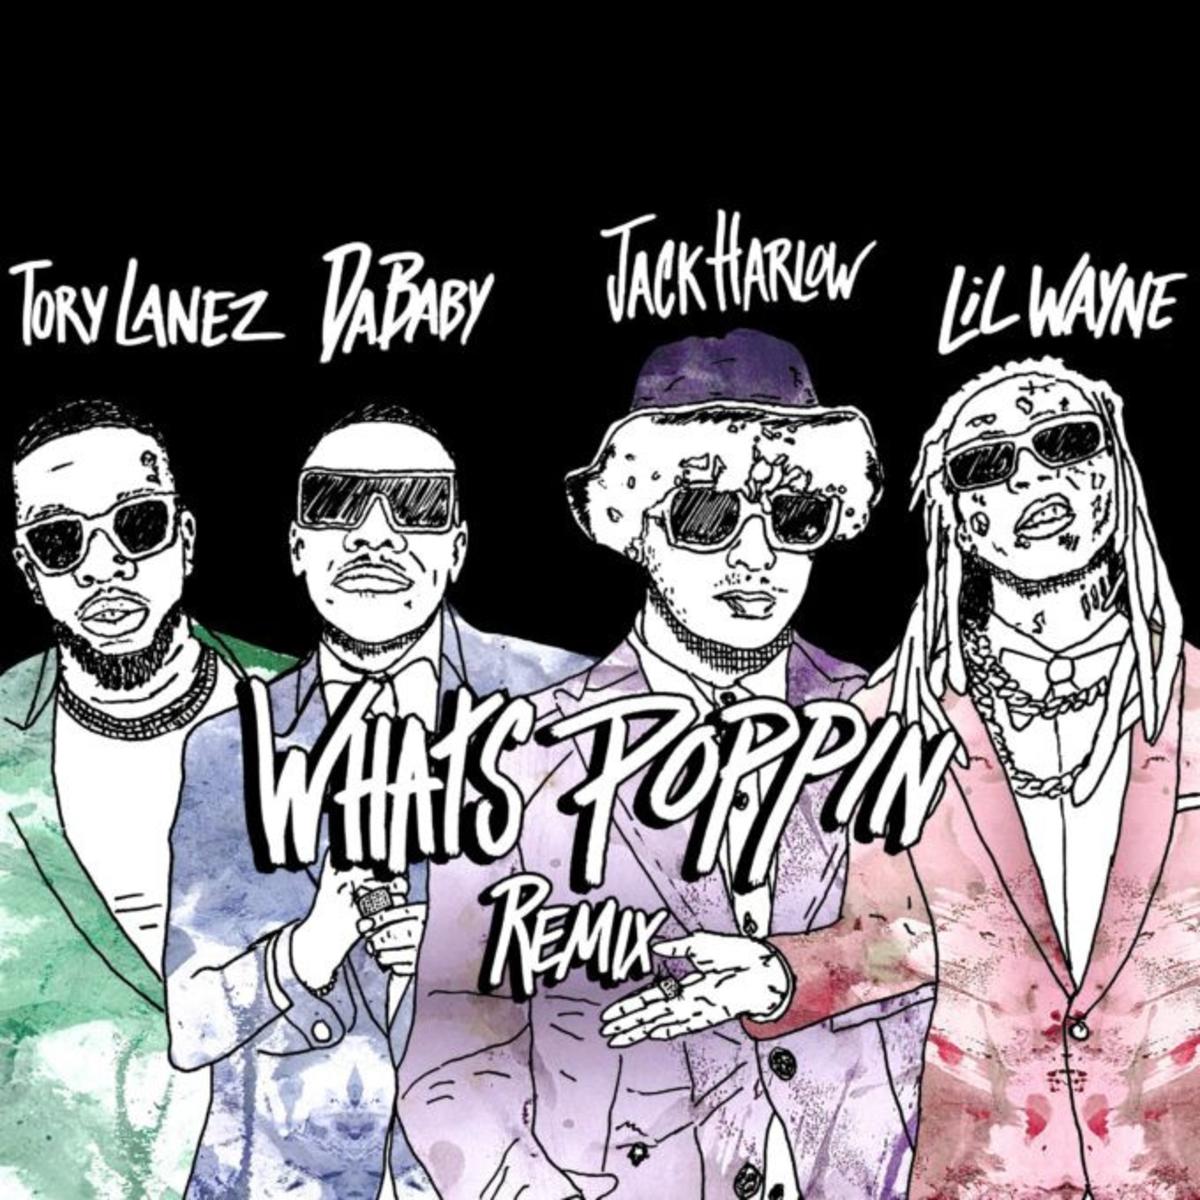 Jack Harlow - WHATS POPPIN (feat. DaBaby, Tory Lanez & Lil Wayne)